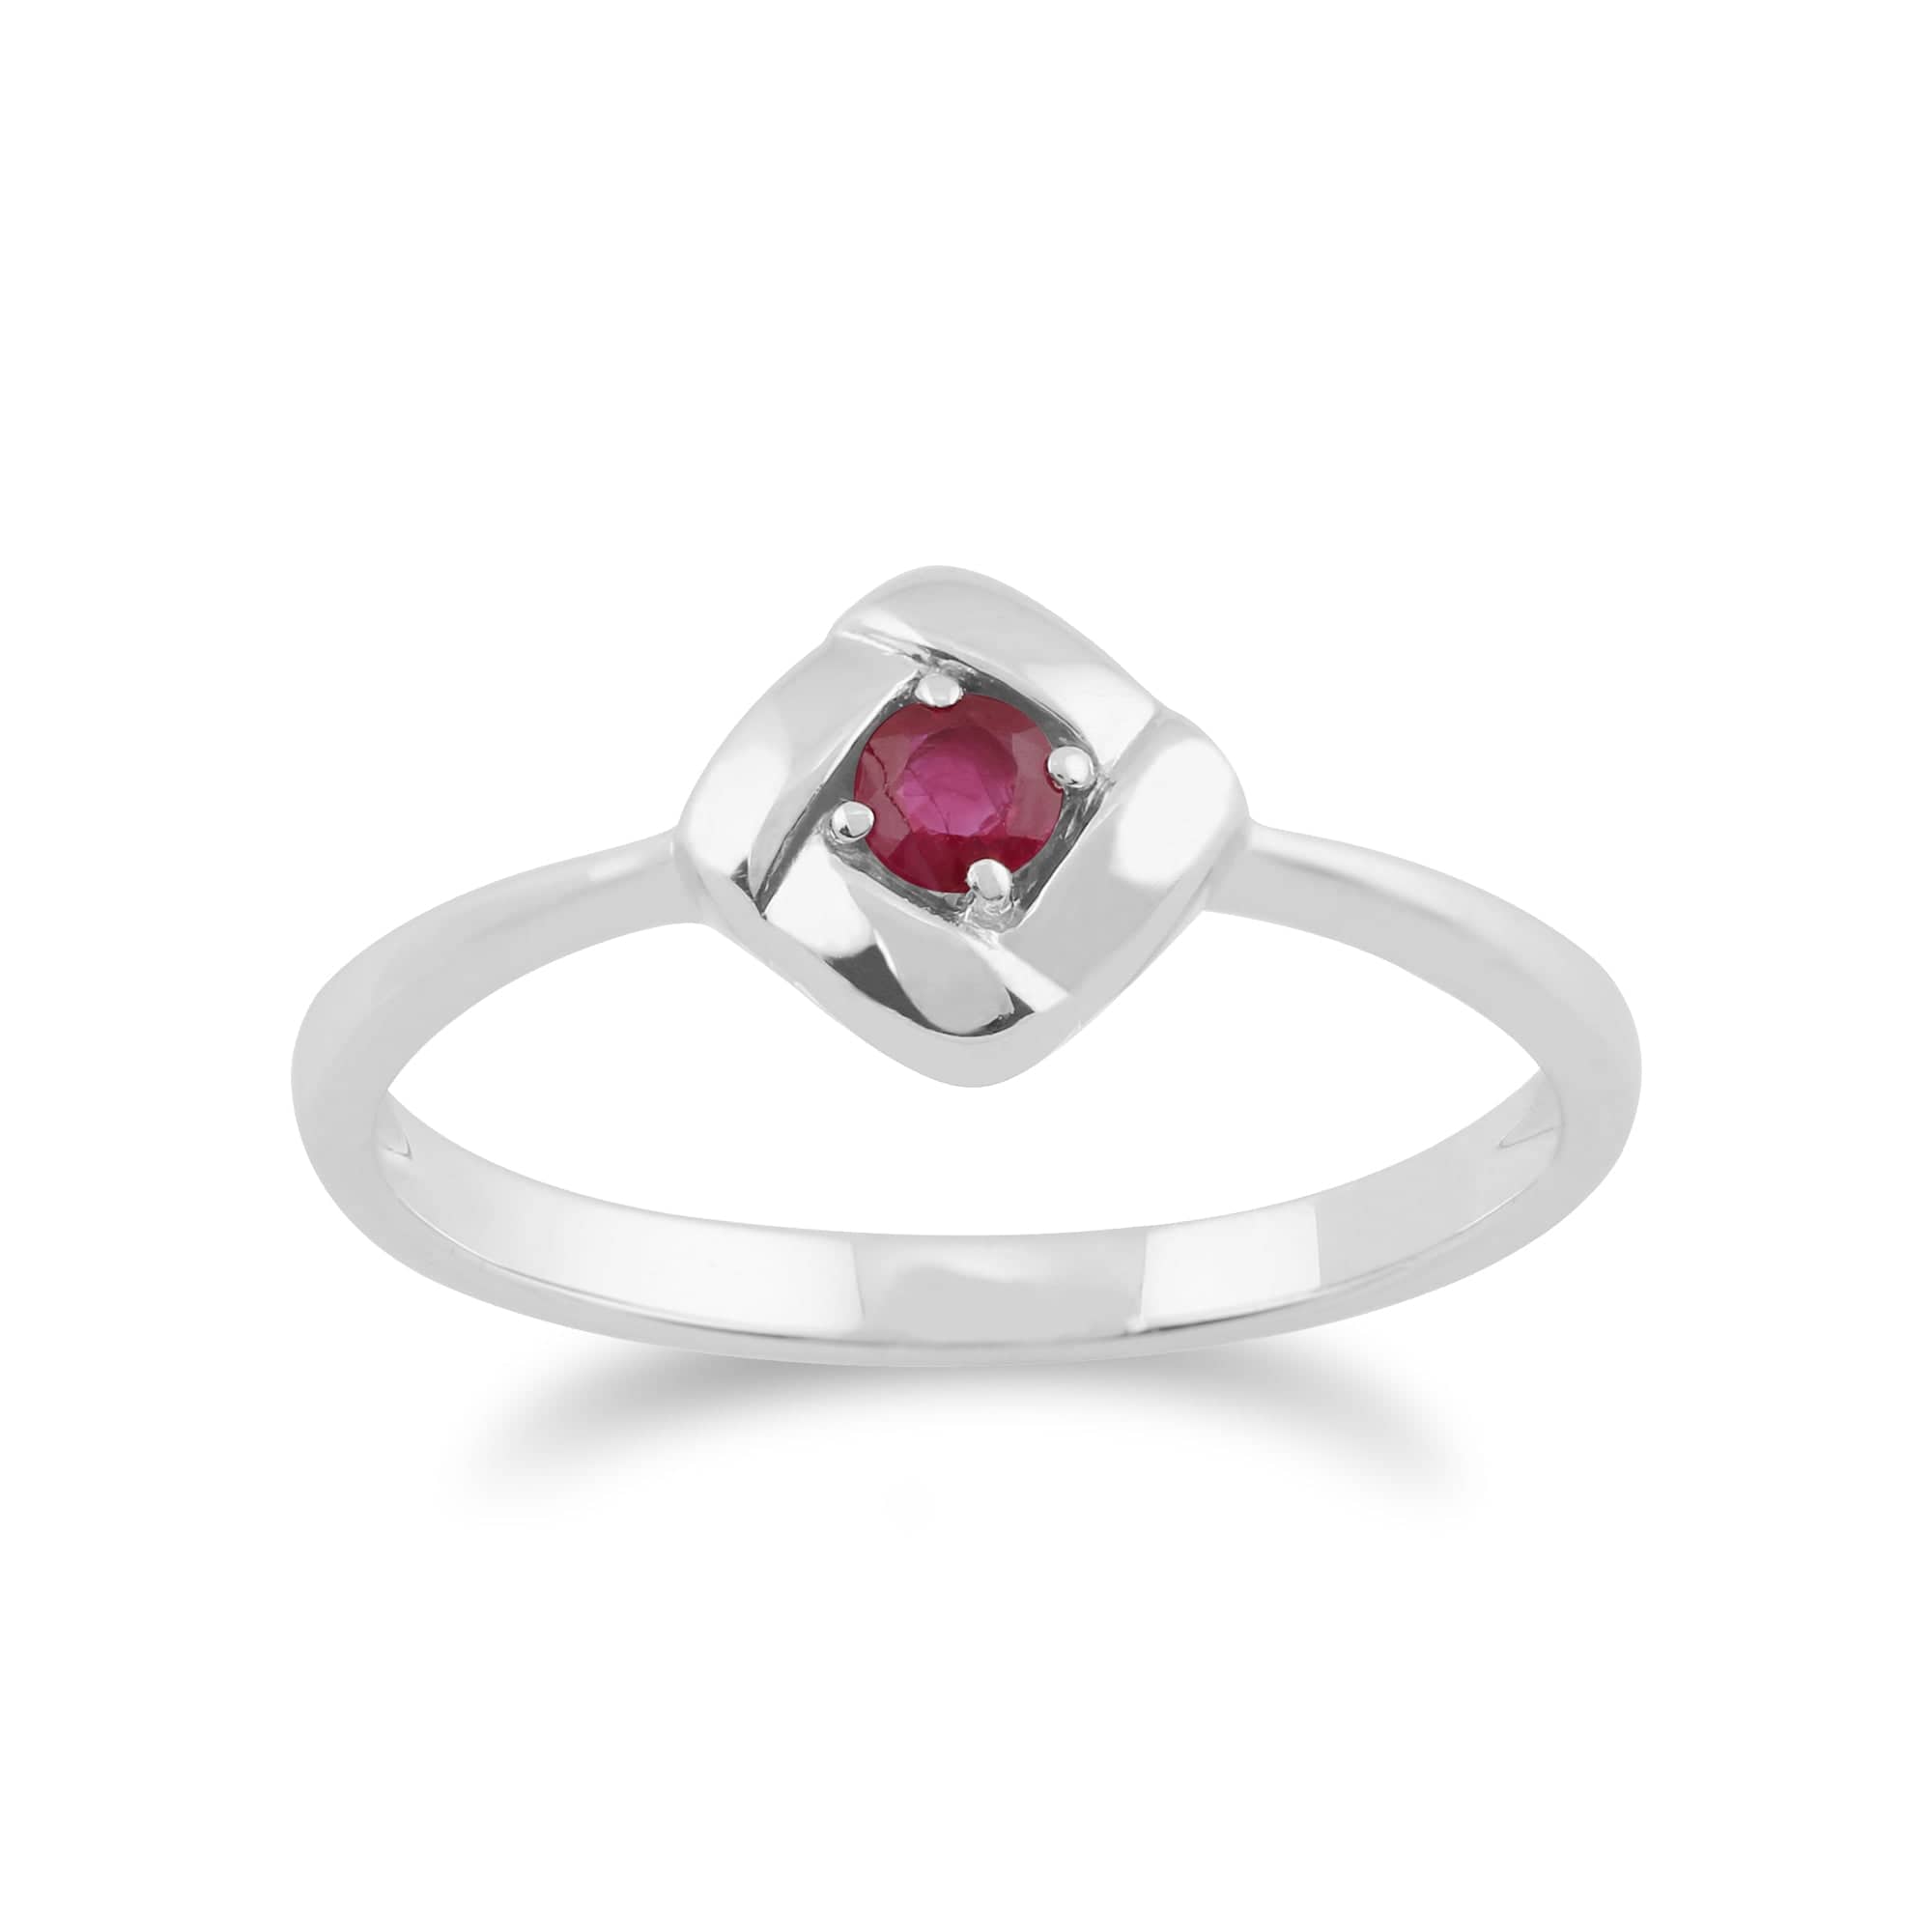 Gemondo 925 Sterling Silver 0.14ct Ruby Square Crossover Ring Image 1